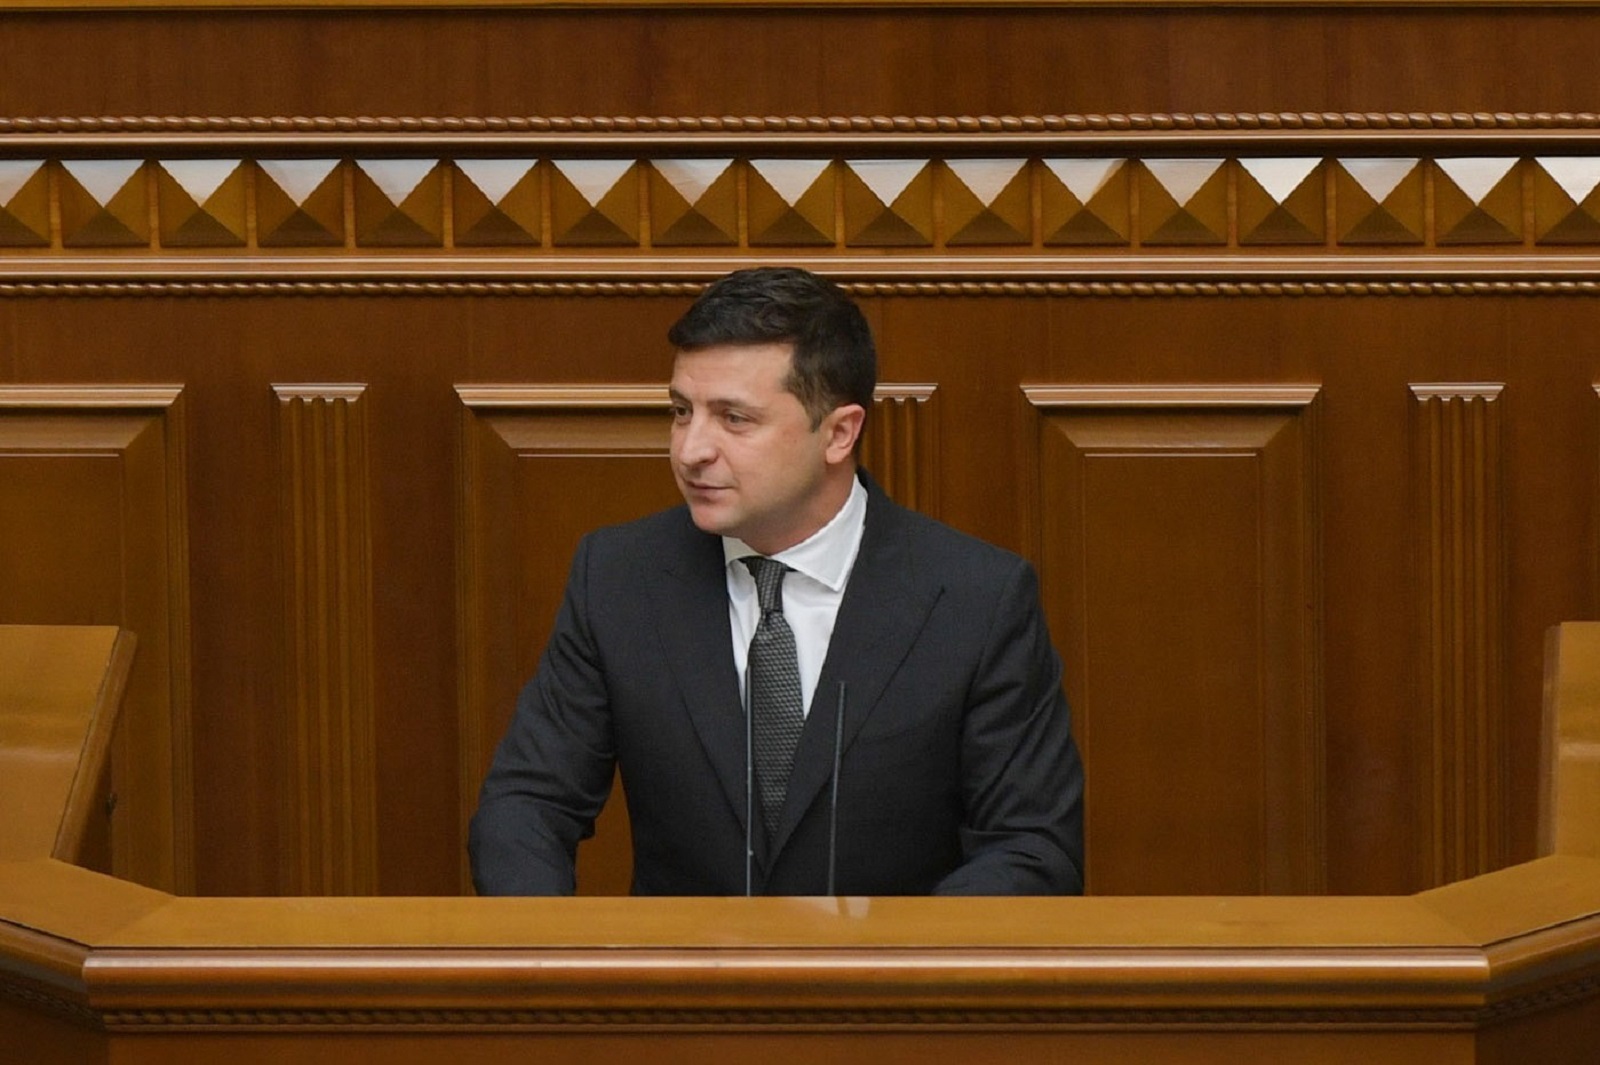 epa08758739 A handout picture provided by the Presidential press office shows Ukrainian President Volodymyr Zelensky speaking in the Ukrainian parliament during his annual State of the Nation Address in Kiev, Ukraine, 20 October 2020. Ukrainian President Volodymyr Zelensky said the domestic economy has suffered from the COVID-19 crisis less than those in many European countries as local media reports.  EPA/Presidential Press Office / HANDOUT  HANDOUT EDITORIAL USE ONLY/NO SALES